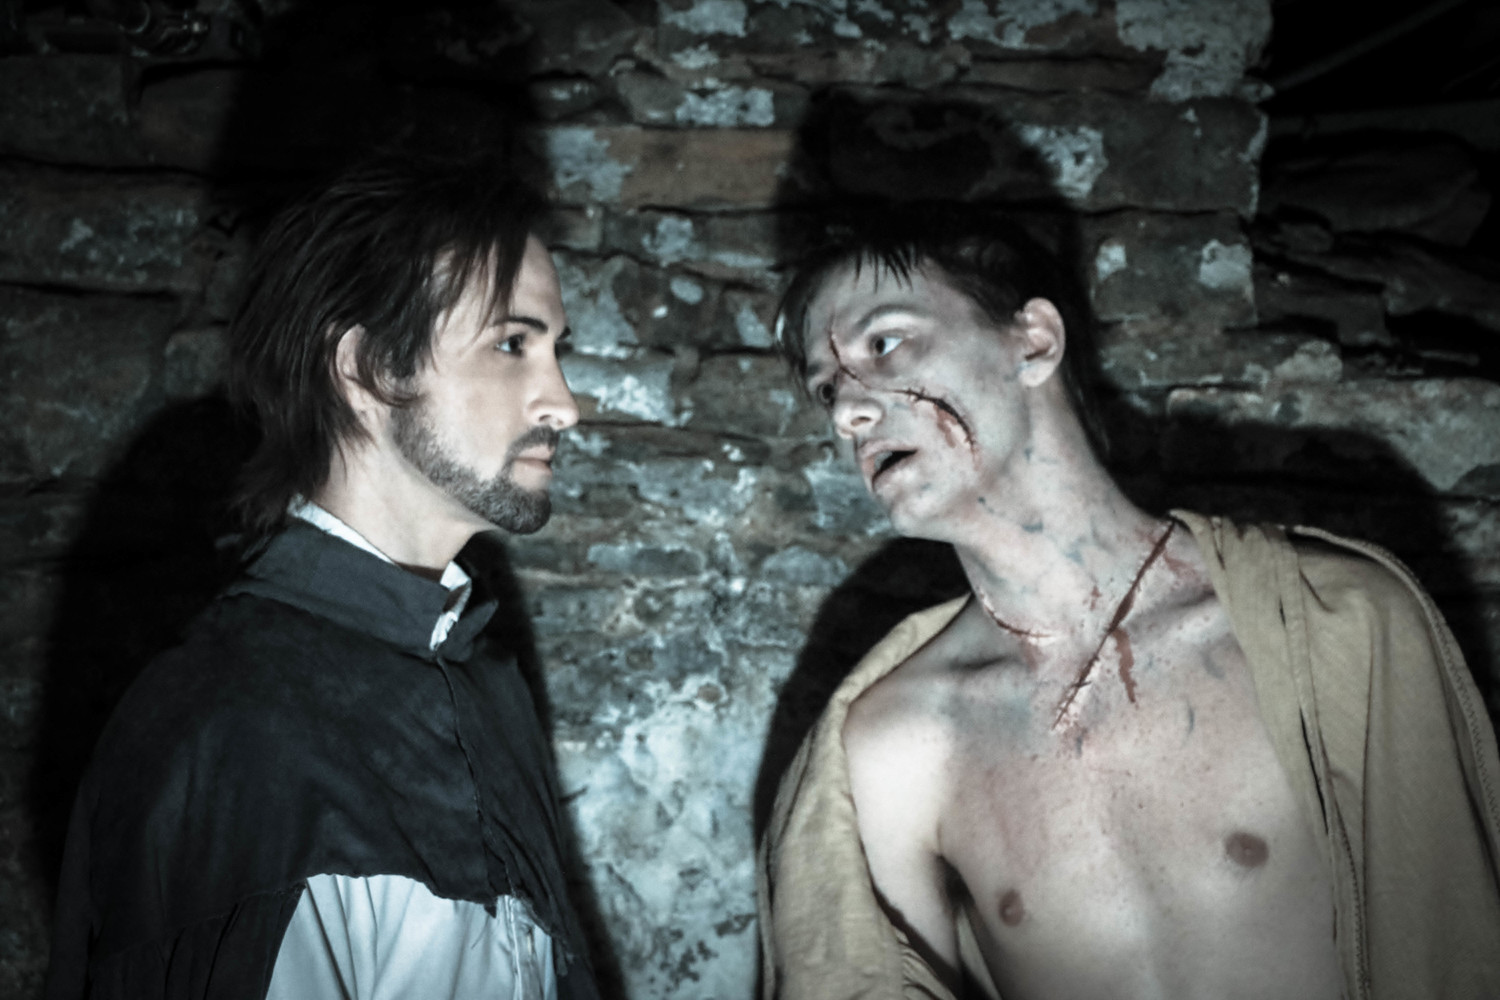 Luka Ashley Carter as Victor Frankenstein and Olaf Eide as Creature
Photo Credit: Kristy Rucker 1